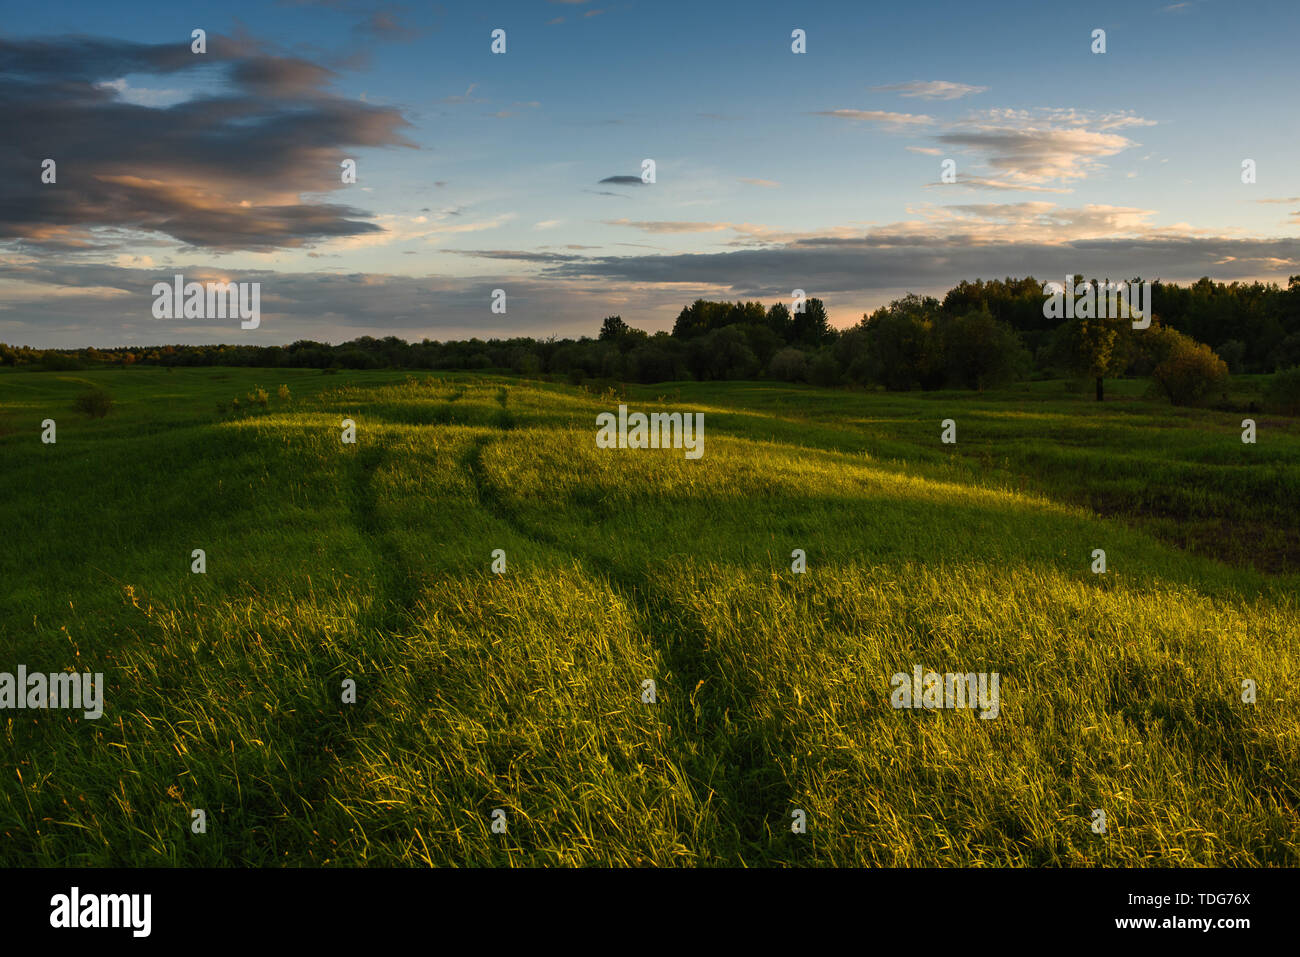 Car tracks in the high field grass during a dramatic sunset. The grass swaying in the wind, deep shadows coming and bringing twilight. Stock Photo